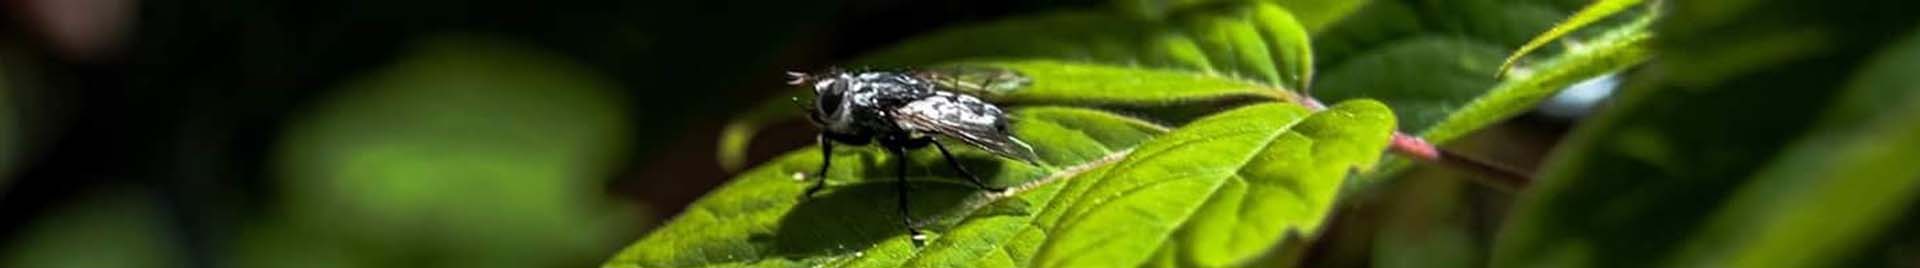 A category header image of a fly sitting on a leaf